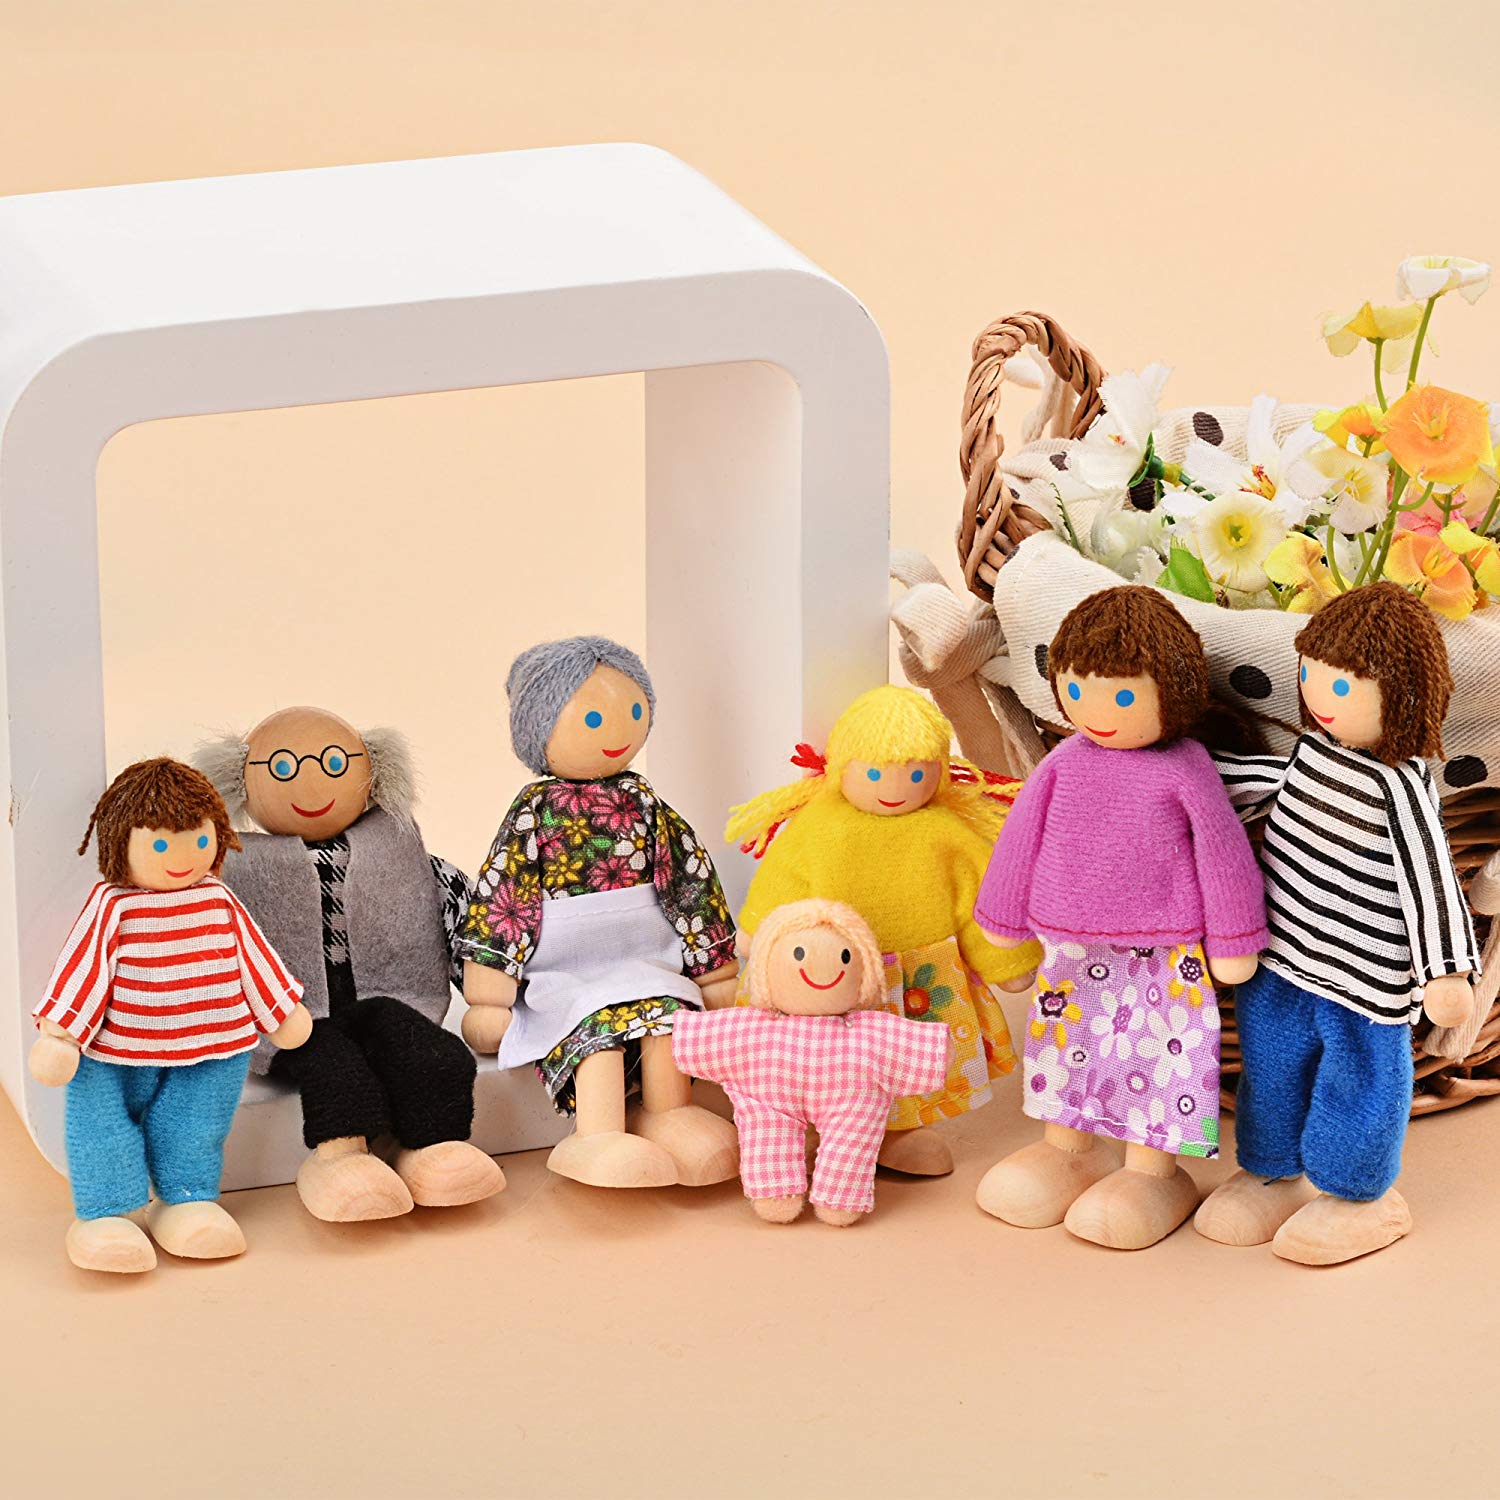 BESTSKY  Kids Girls Lovely Happy Dolls Family Playset Wooden Figures Set of 7 People for Children Dollhouse Pretend Gift - image 1 of 7